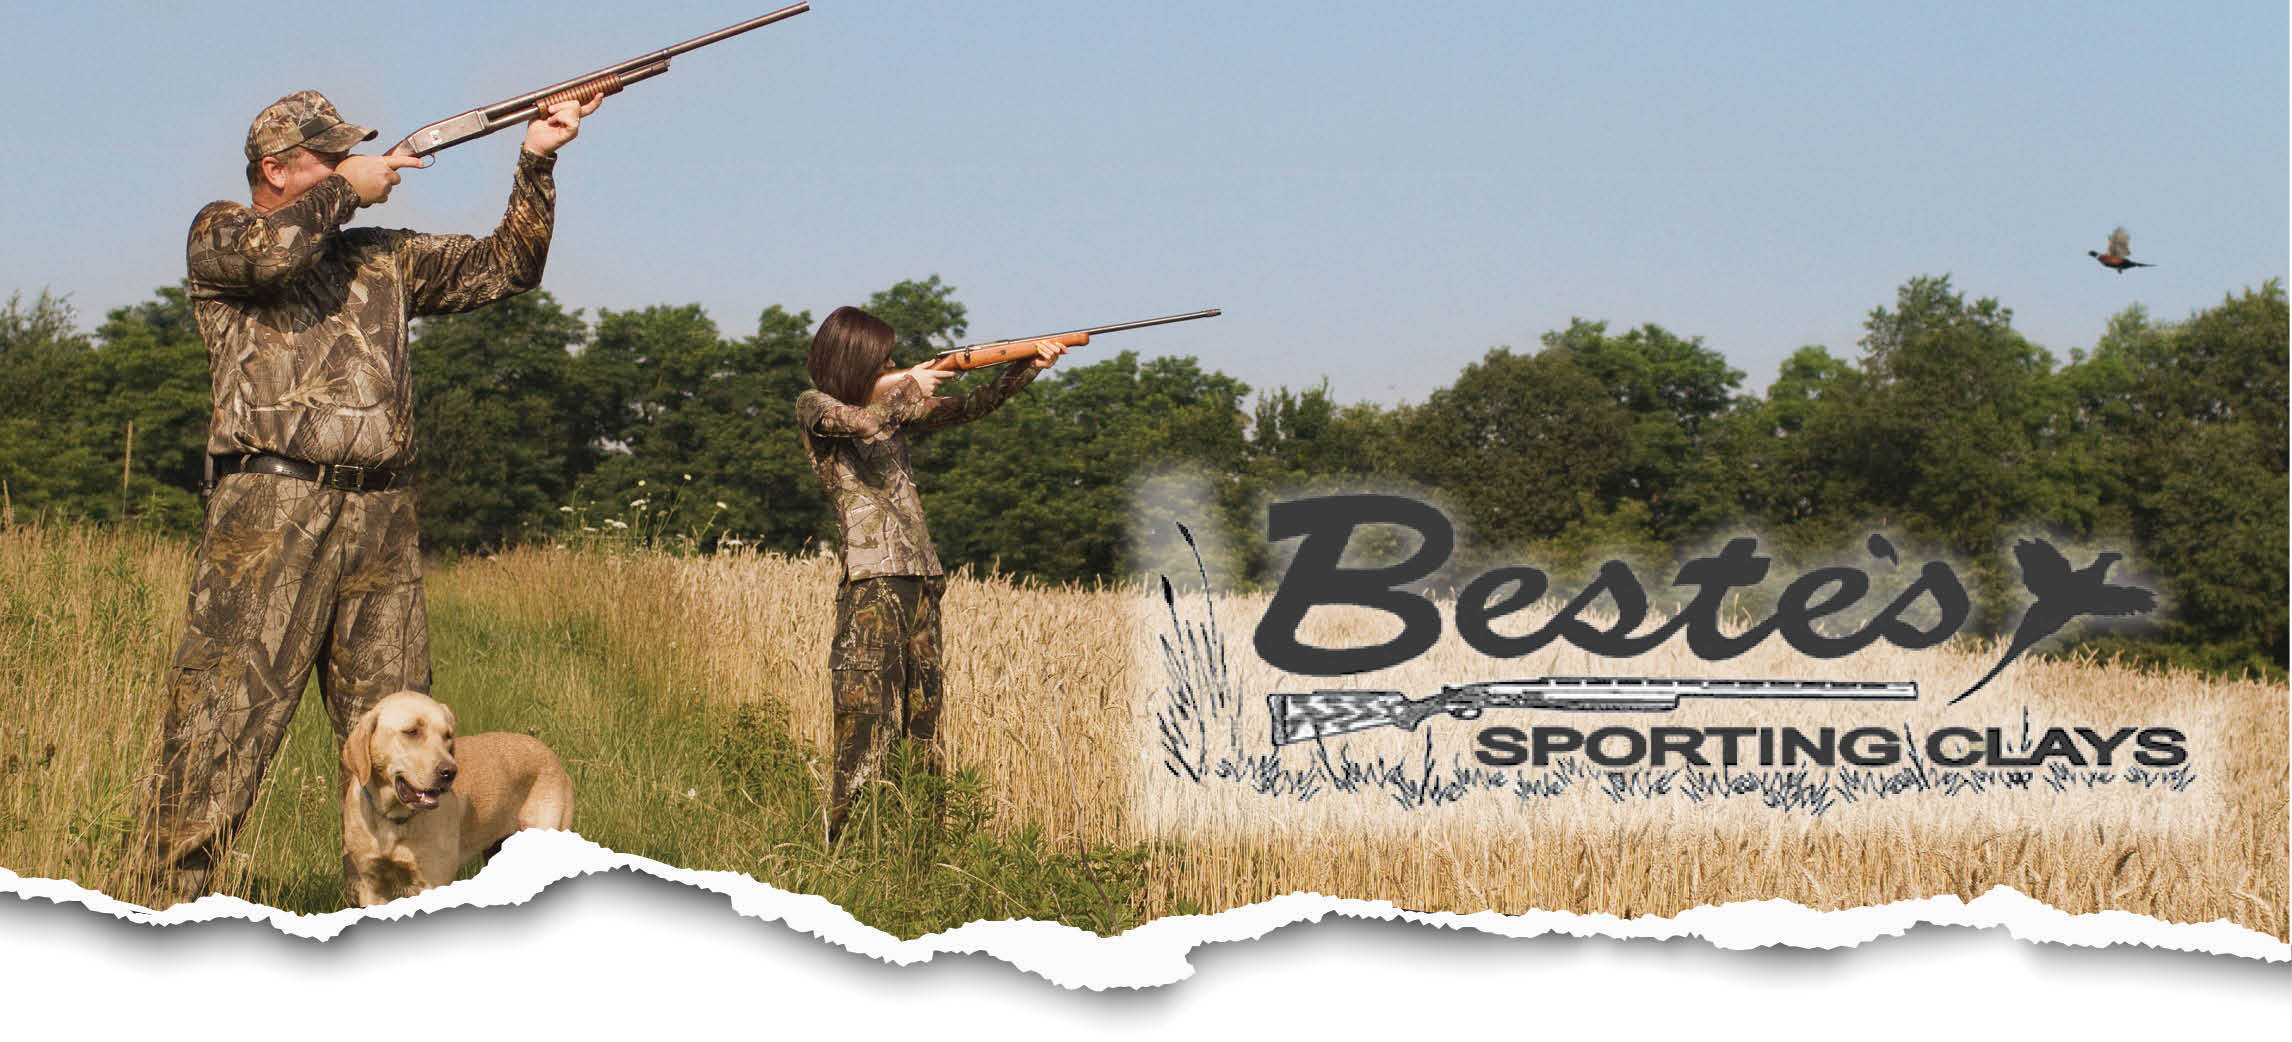 Beste's Sporting Clays and Pheasant Hunting Preserve